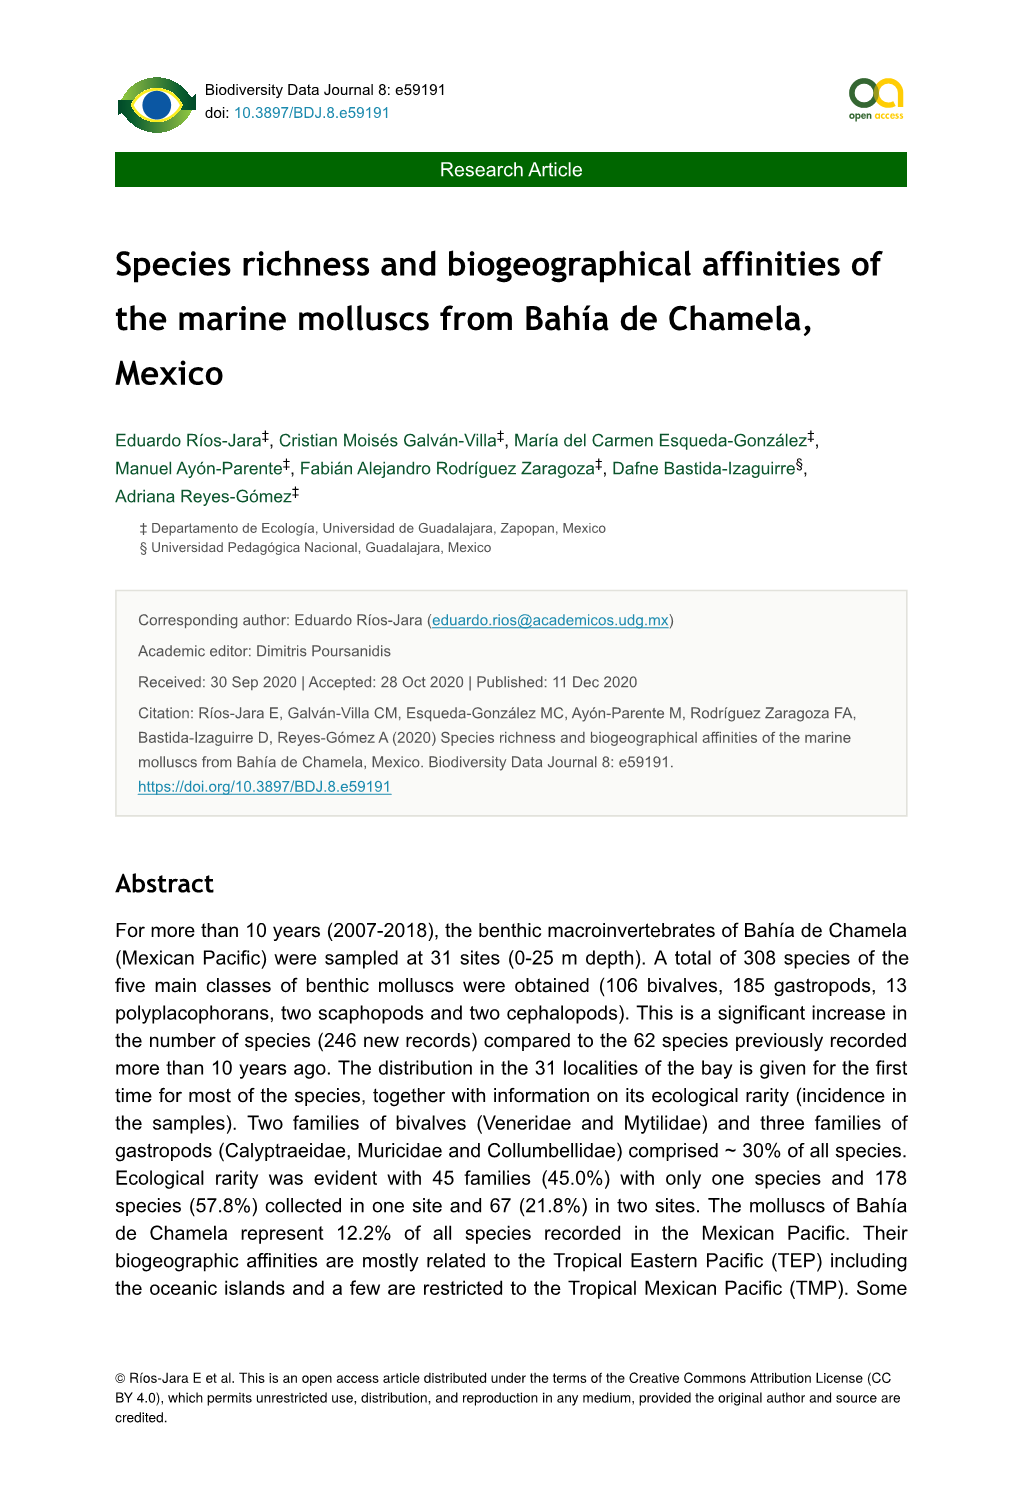 Species Richness and Biogeographical Affinities of the Marine Molluscs from Bahía De Chamela, Mexico